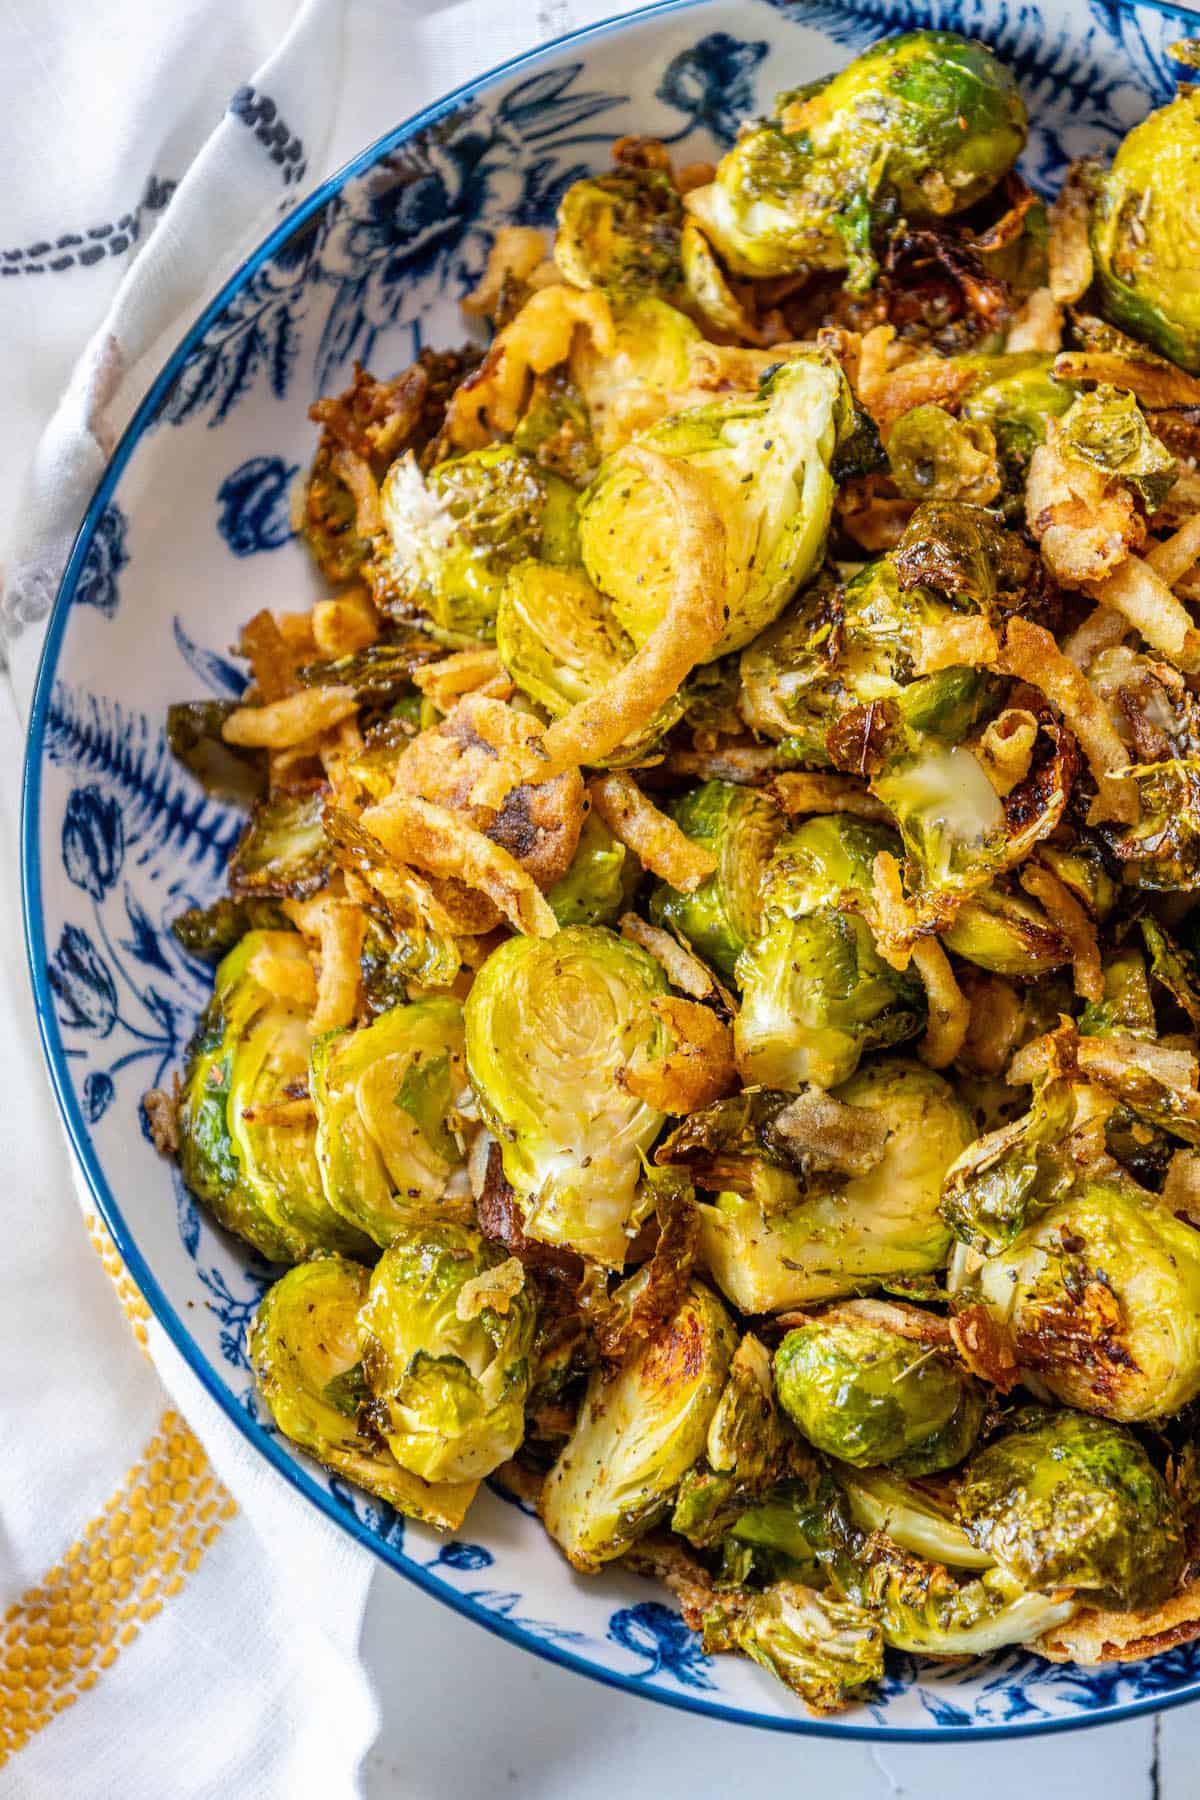 Roasted Brussels sprouts in a blue and white bowl.